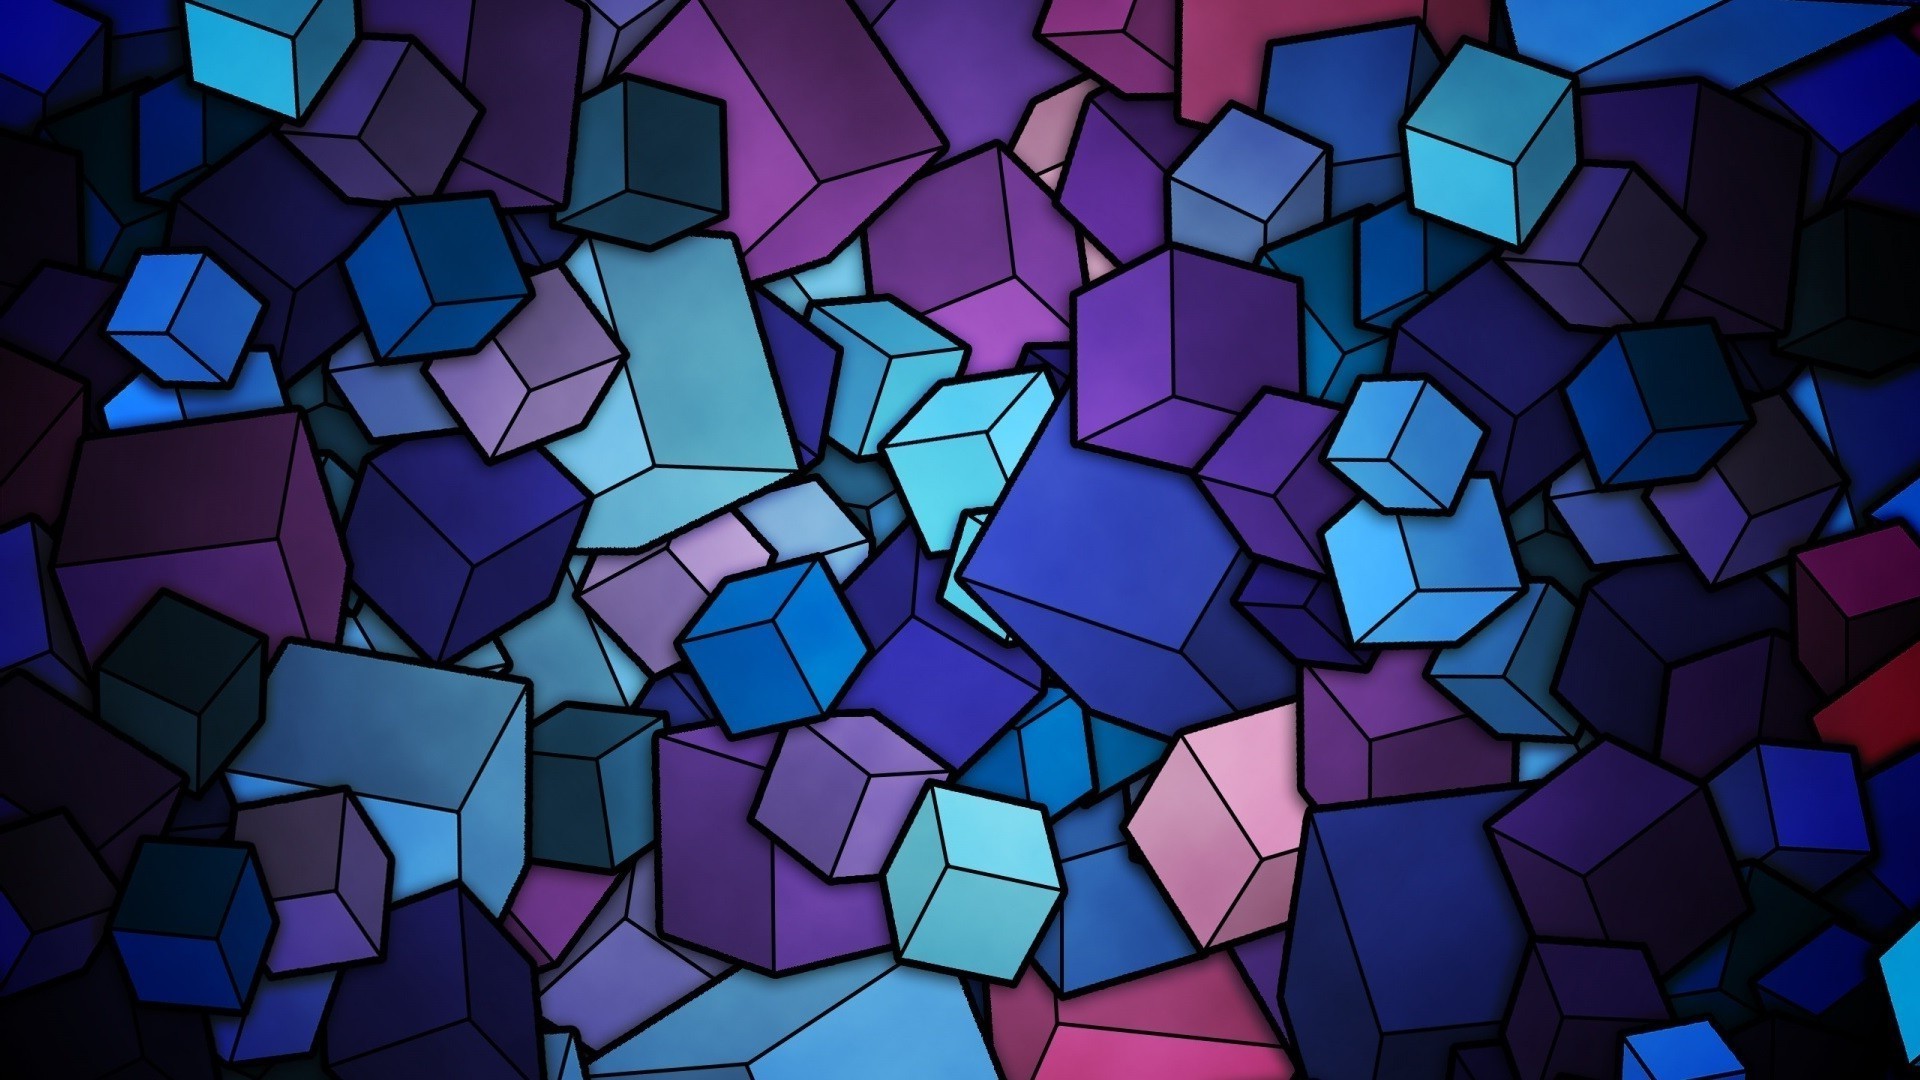 nice wallpaper for android,blue,purple,violet,pattern,glass